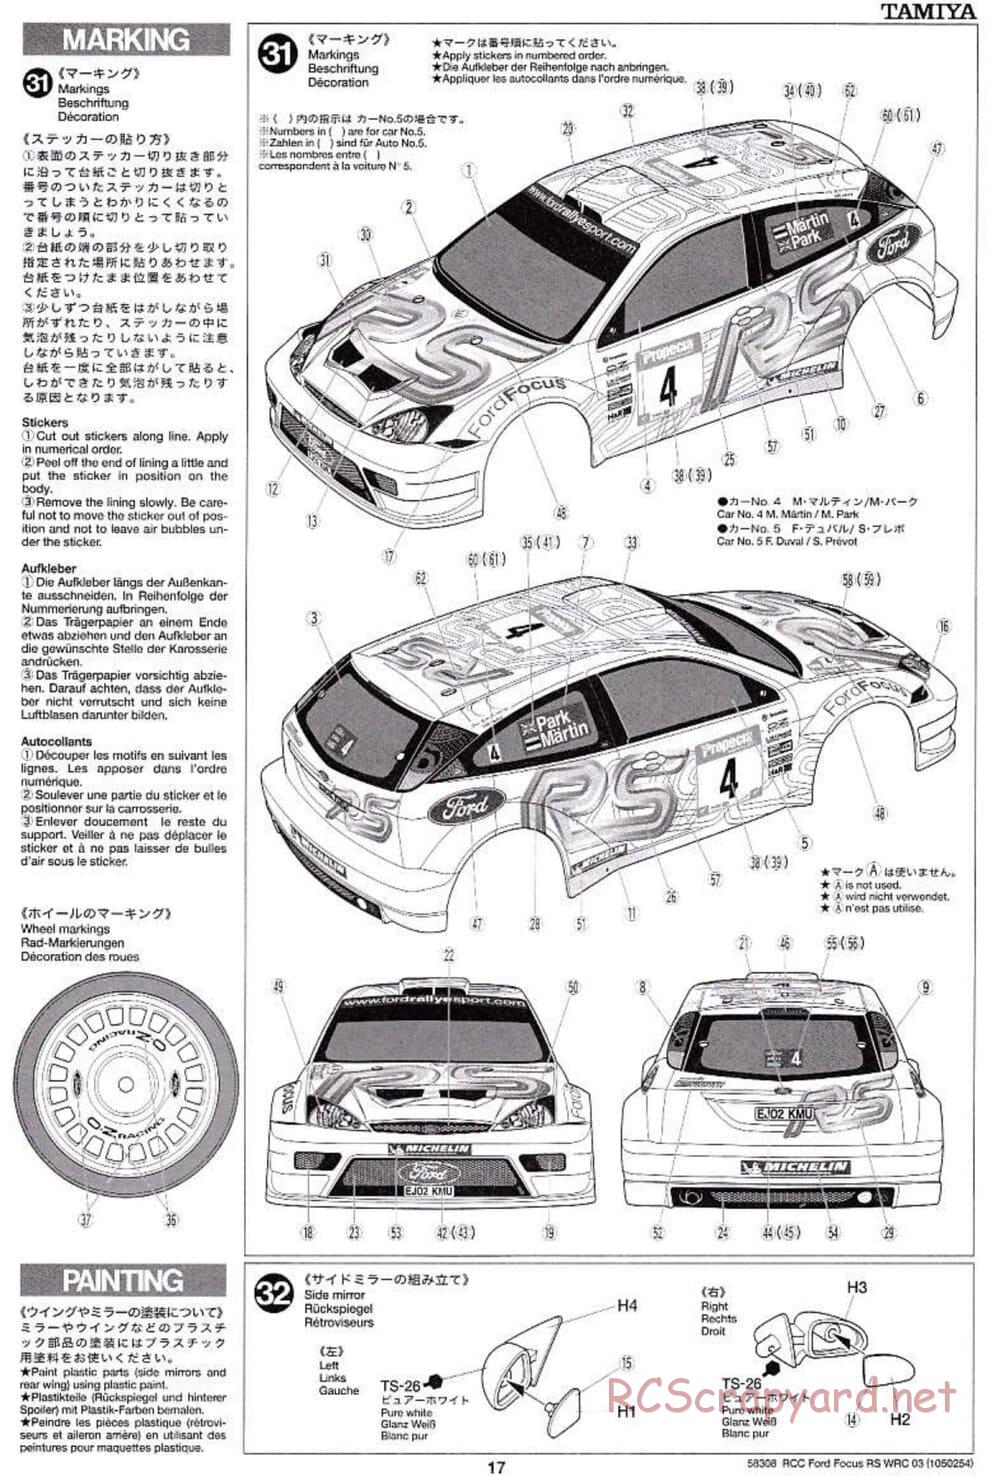 Tamiya - Ford Focus RS WRC 03 - TT-01 Chassis - Manual - Page 17